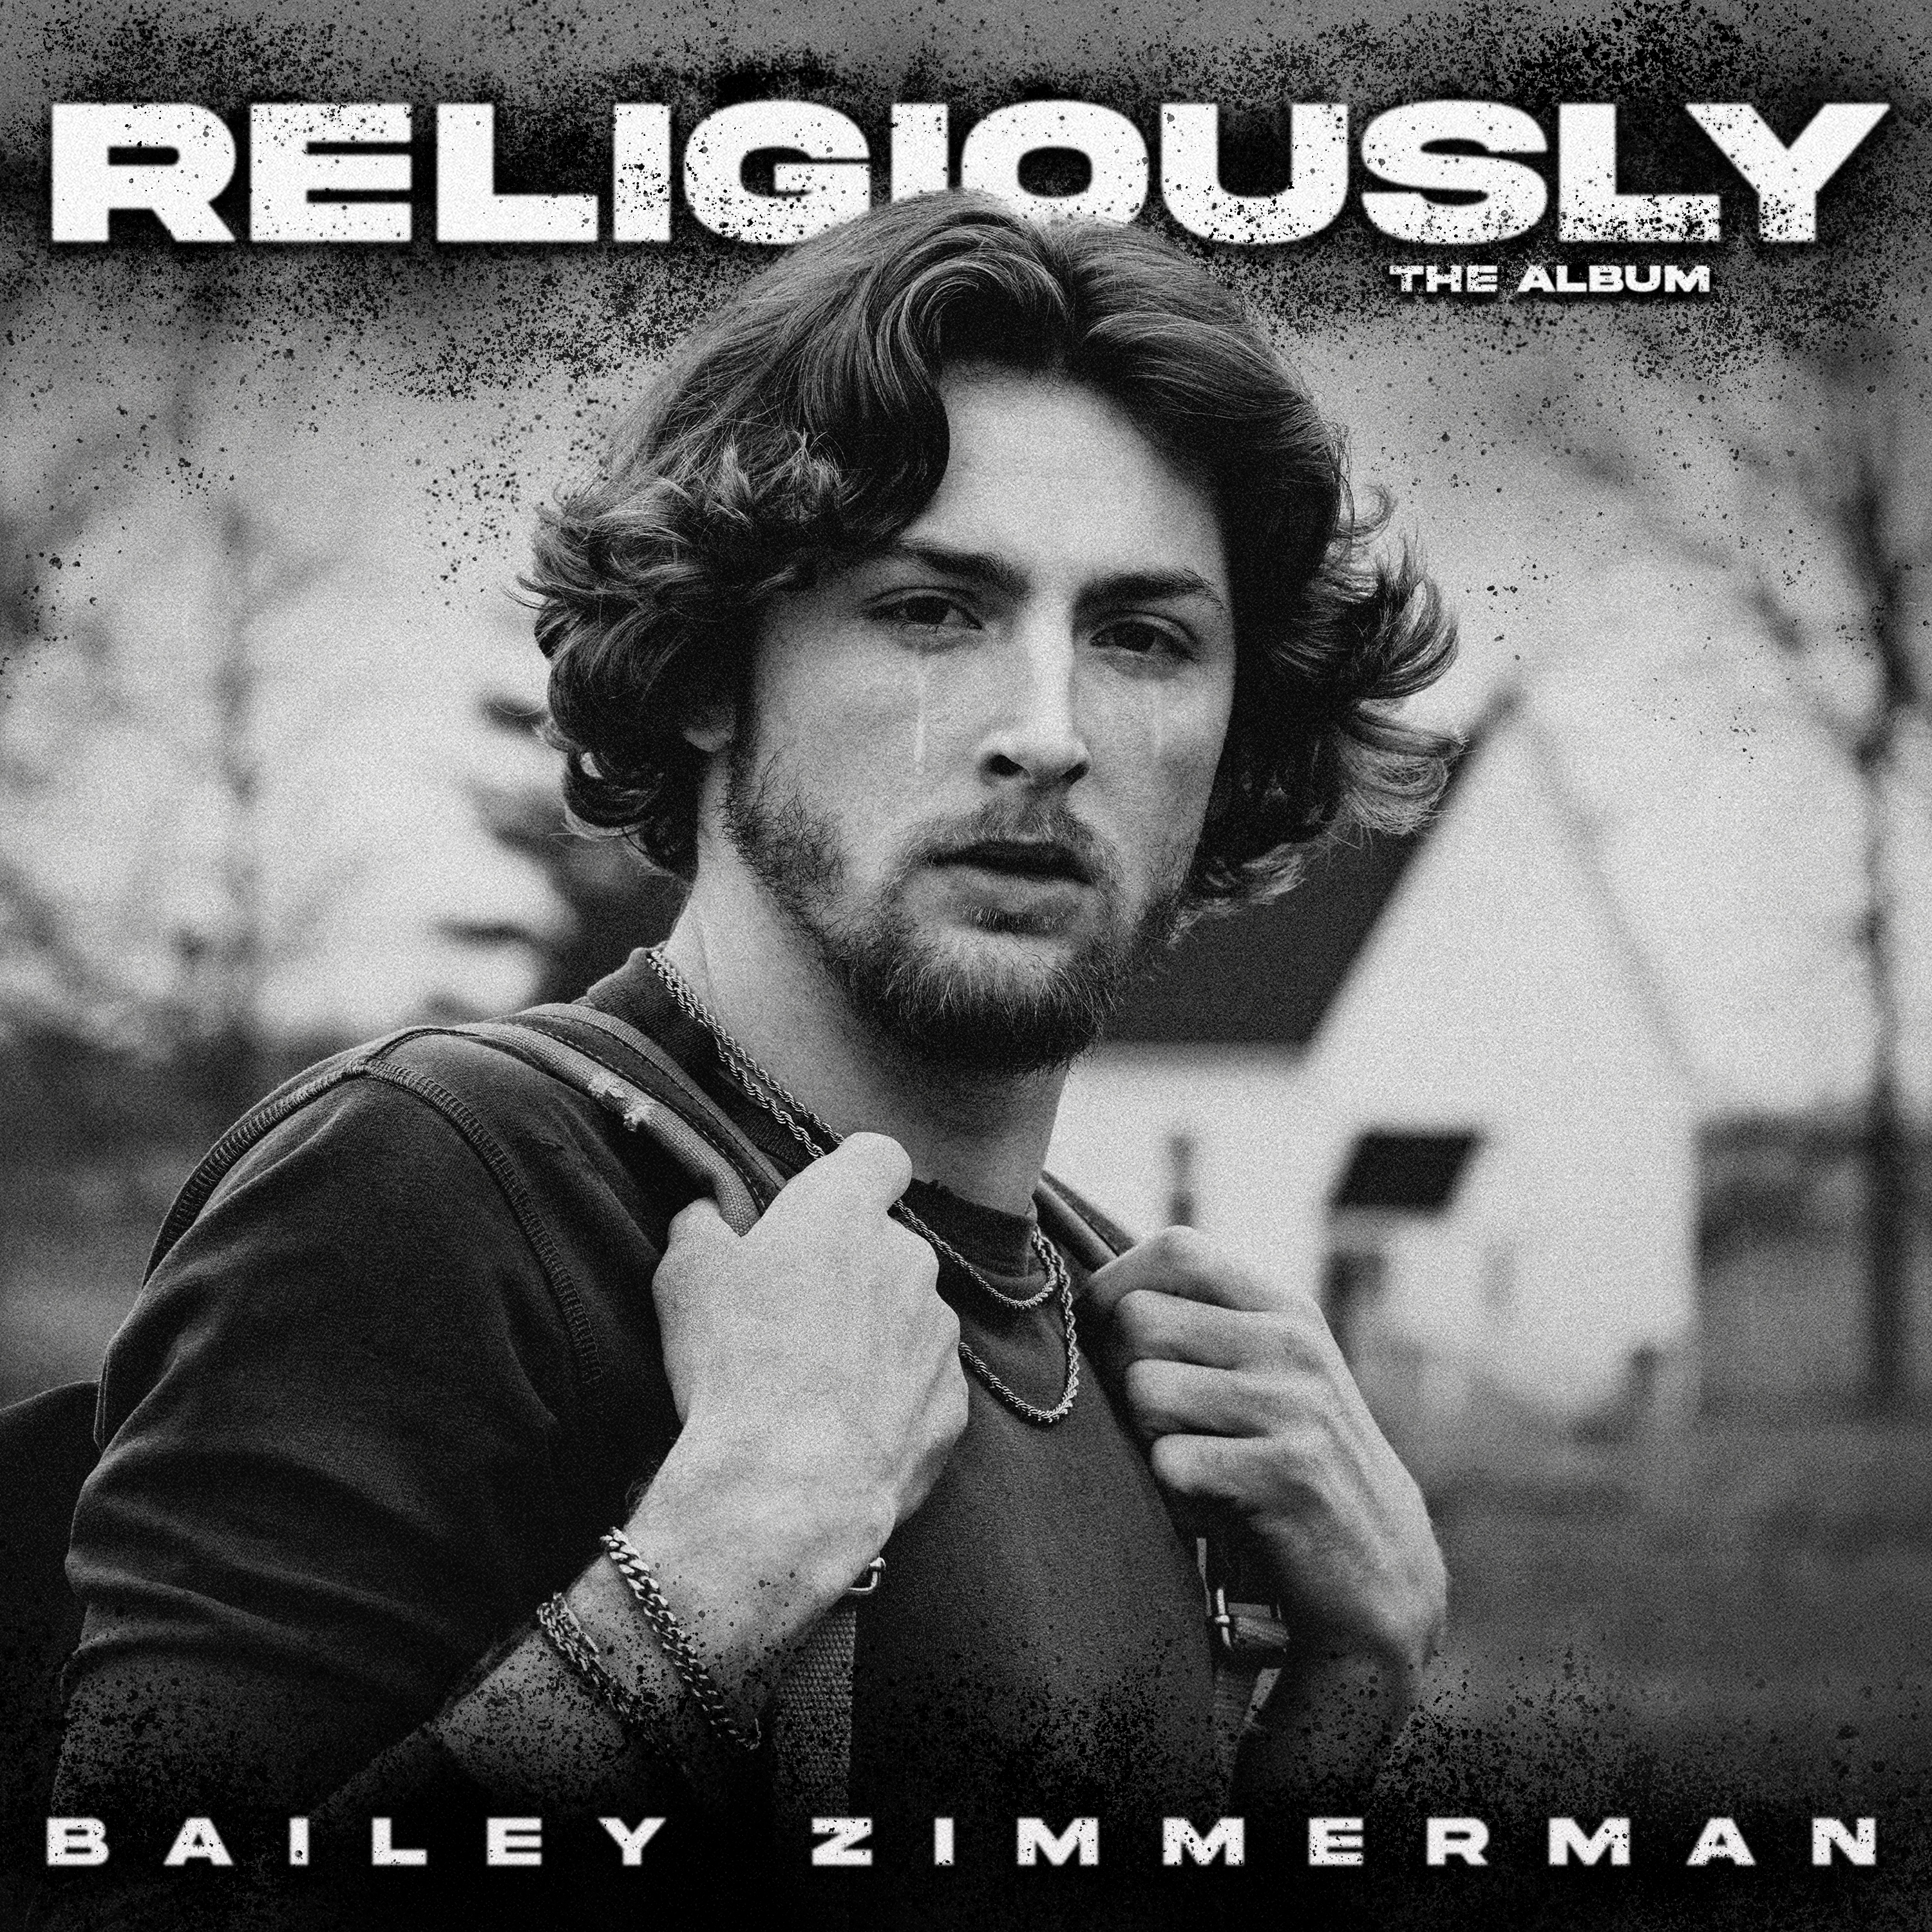 BAILEY ZIMMERMAN'S FULL-LENGTH DEBUT, RELIGIOUSLY. THE ALBUM., OUT NOW